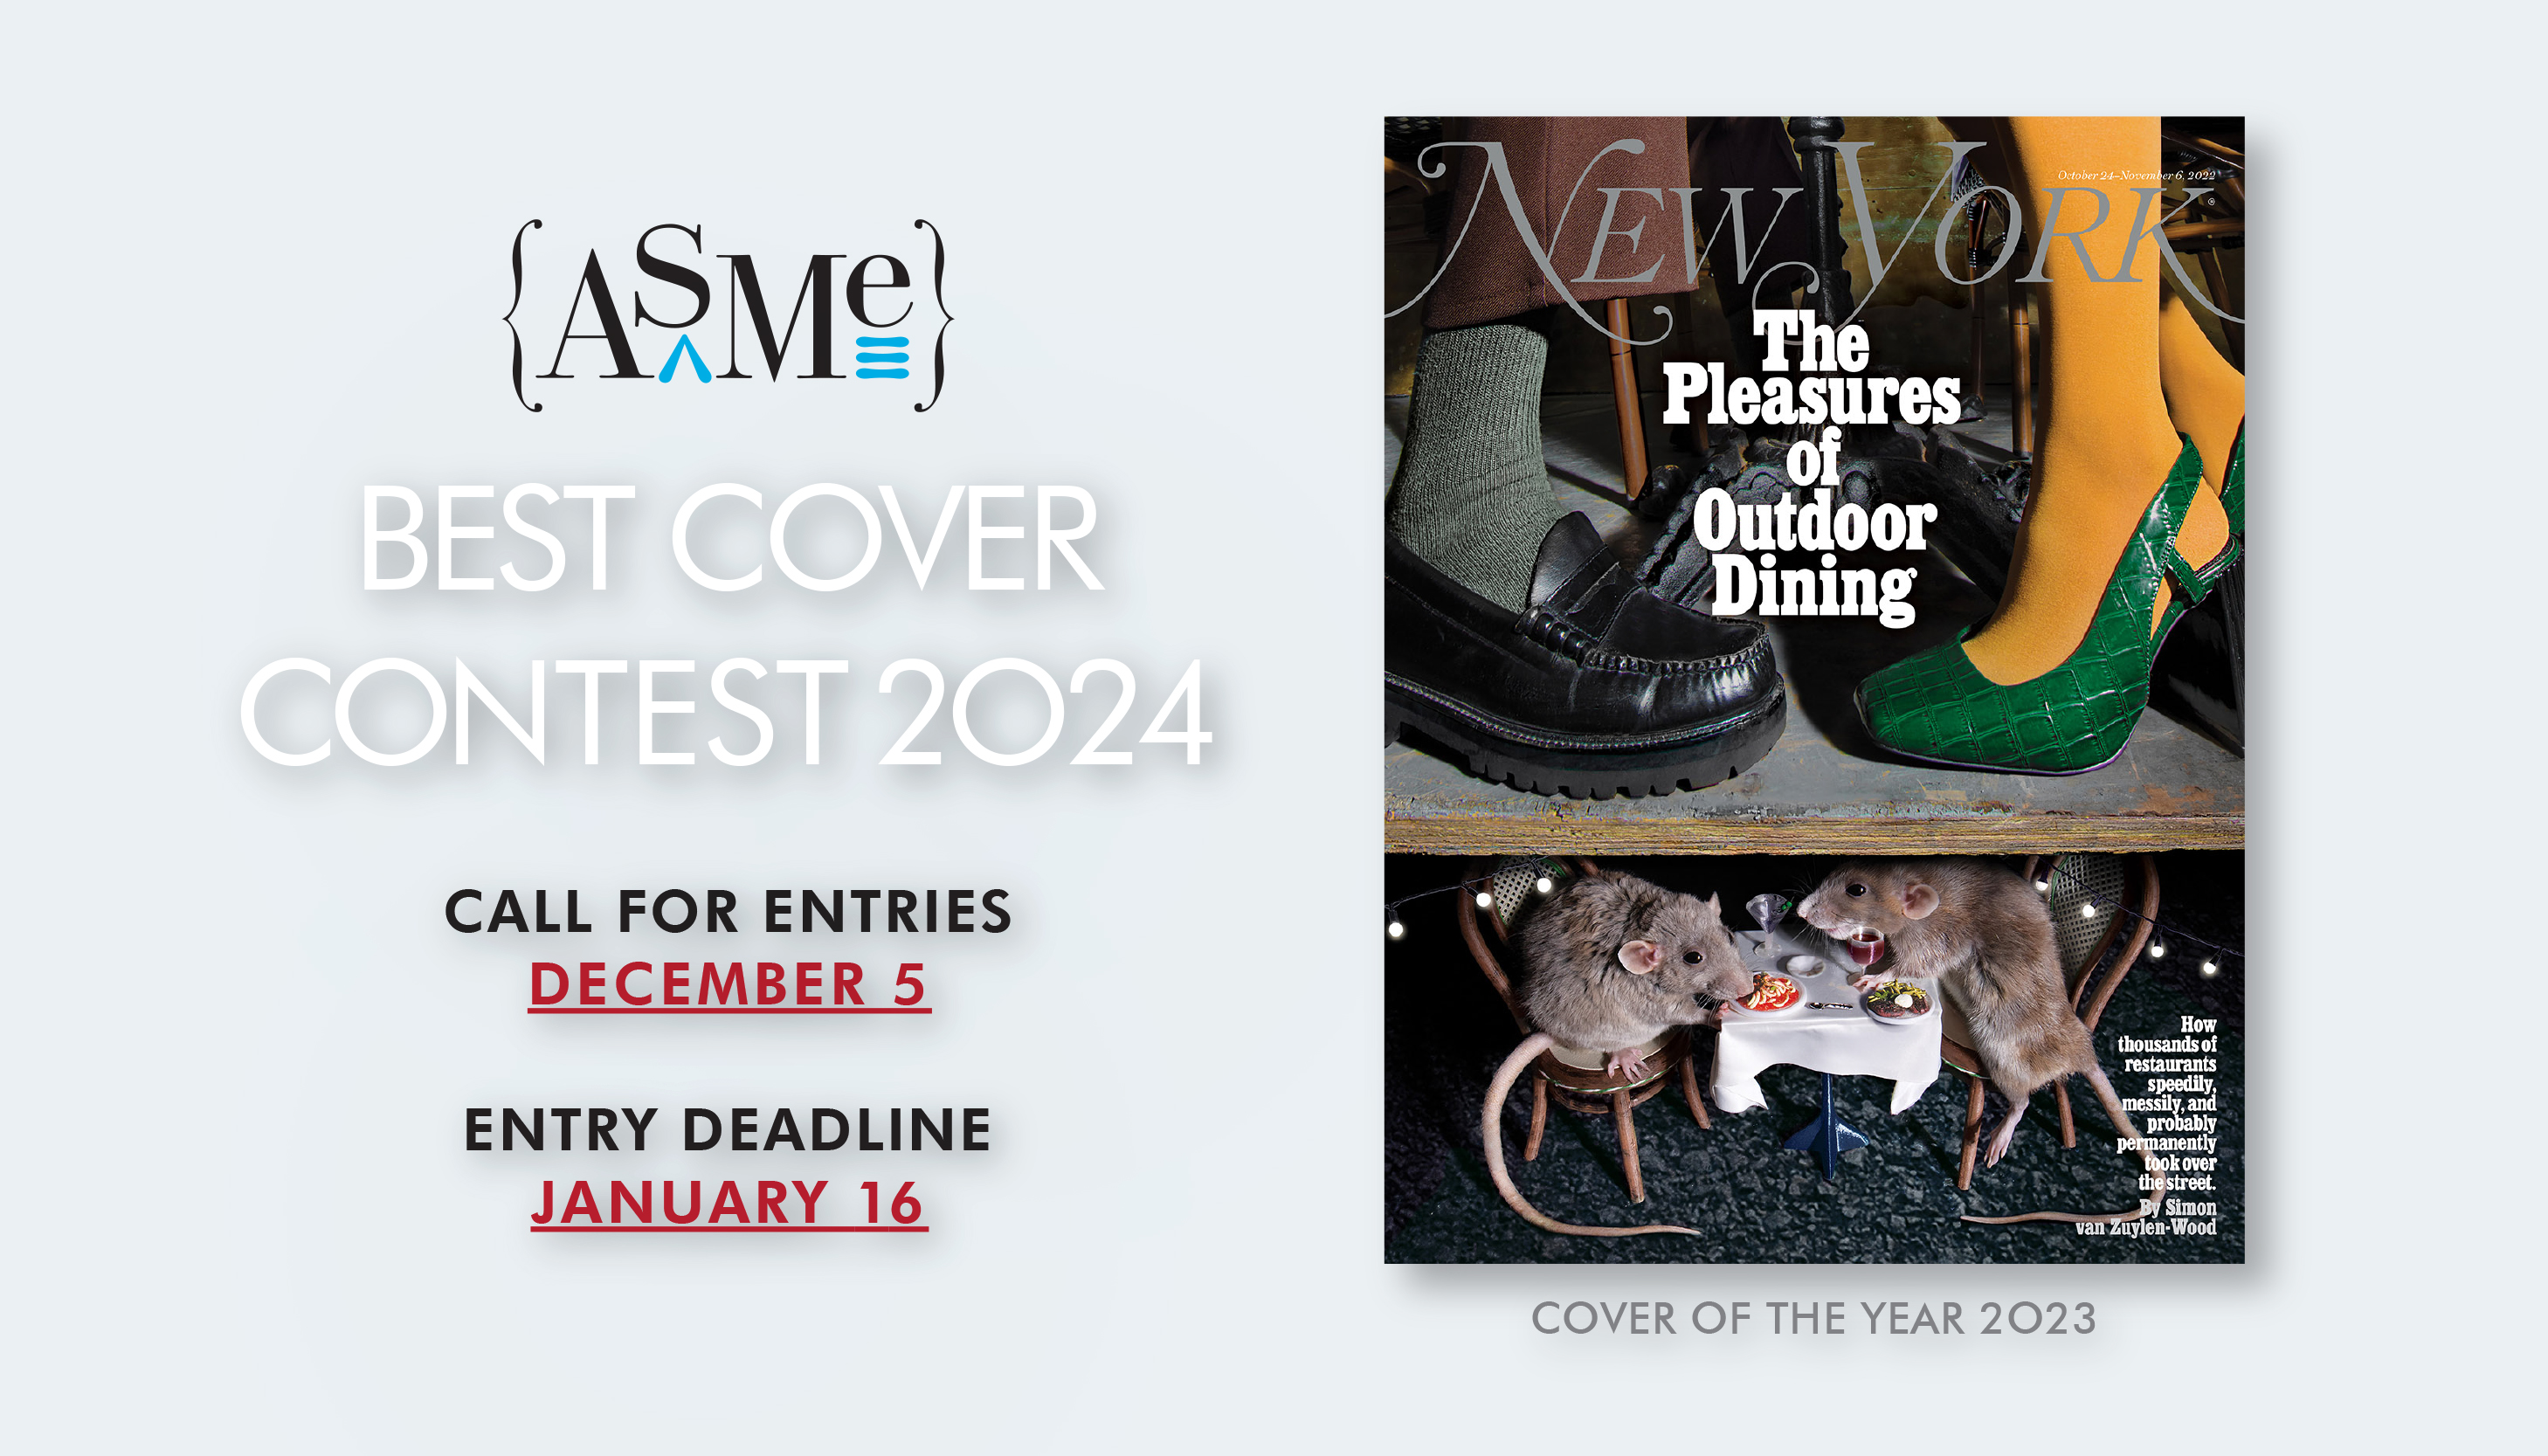 ASME Best Cover Contest 2024